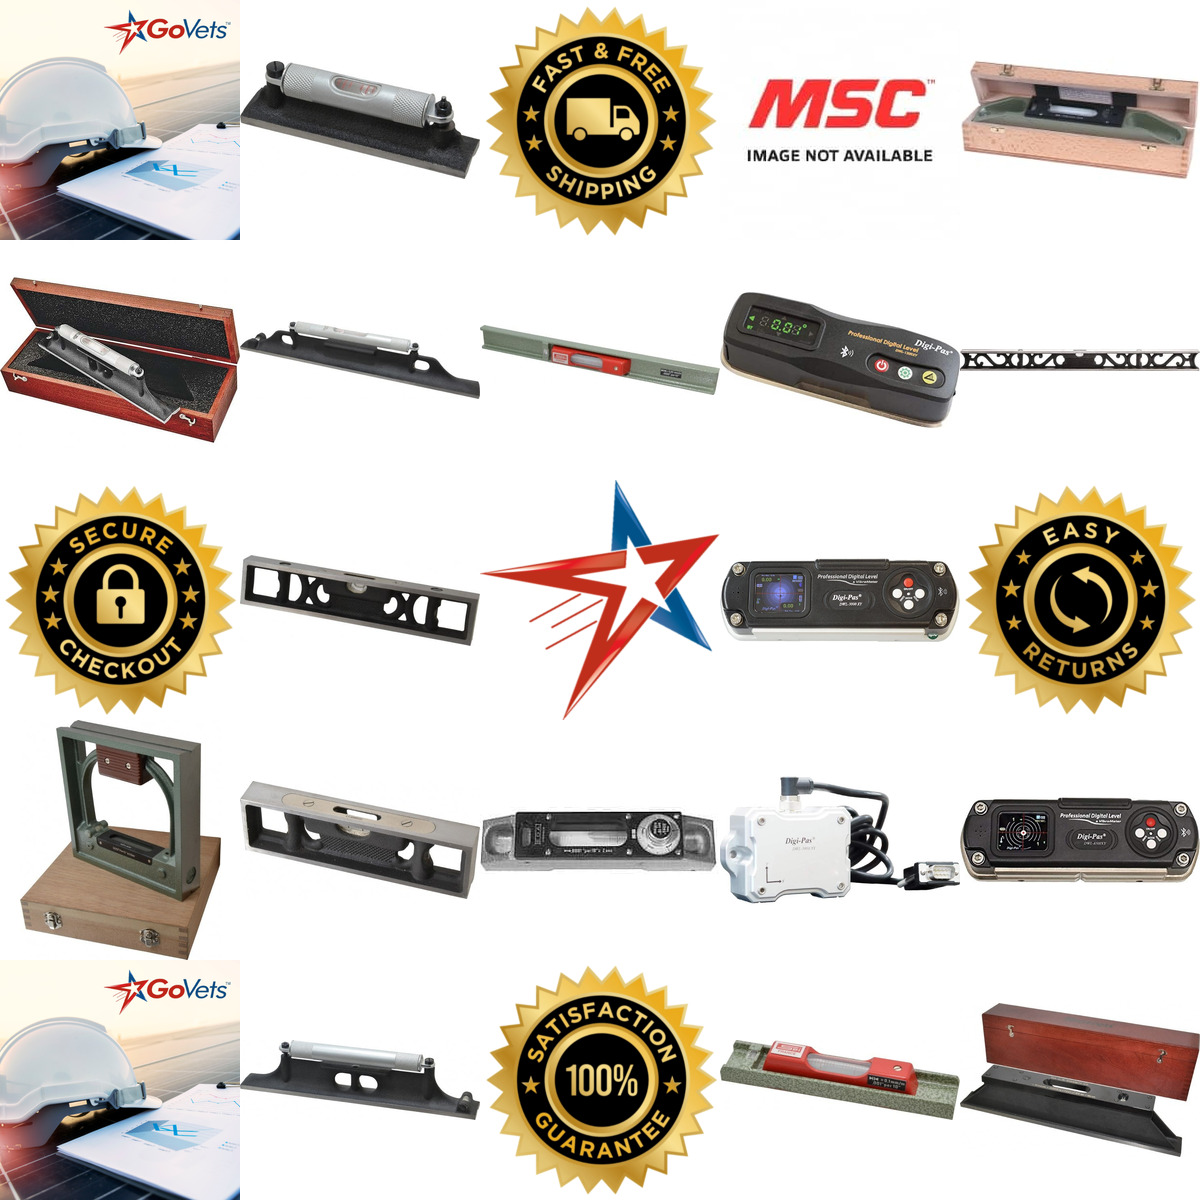 A selection of Master Precision and Machinists Levels products on GoVets